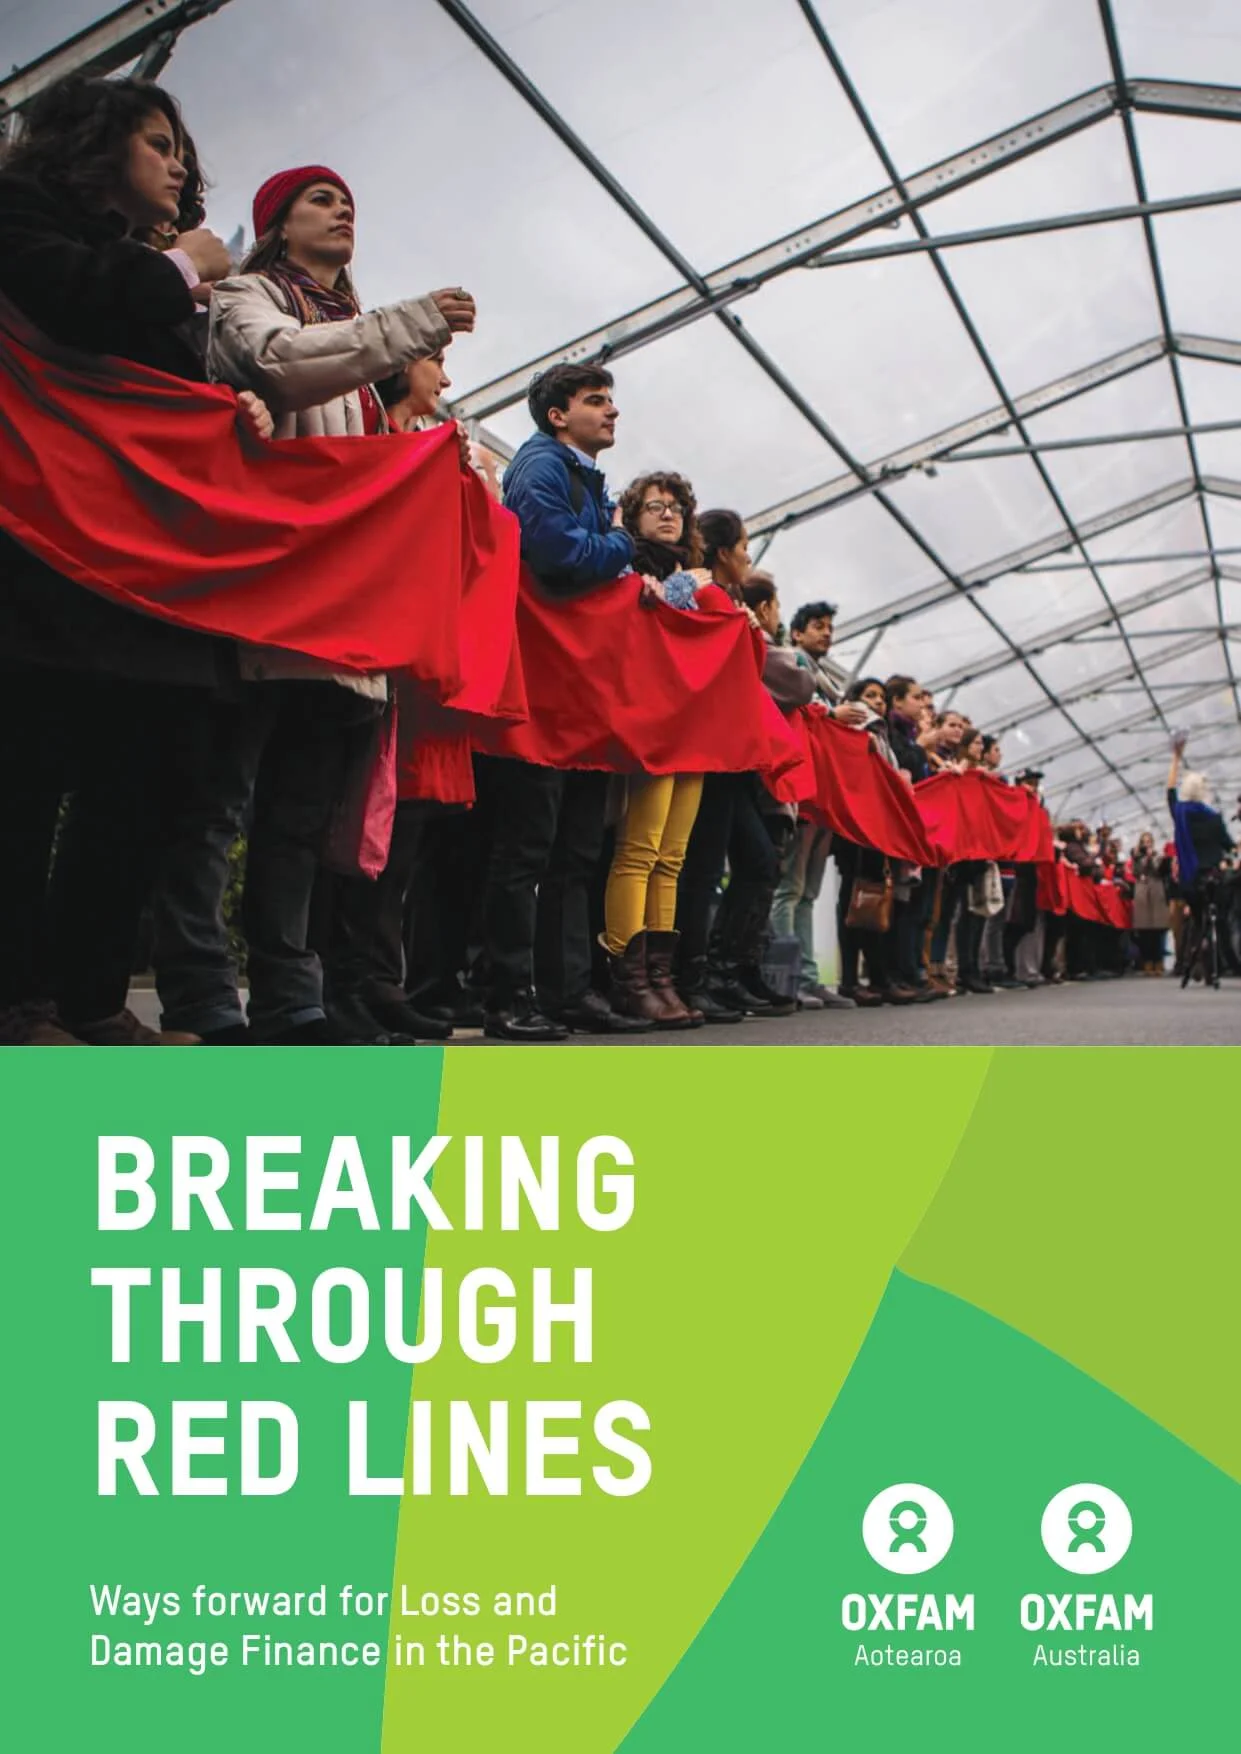 Breaking through red lines: Ways forward for Loss and Damage Finance in the Pacific.